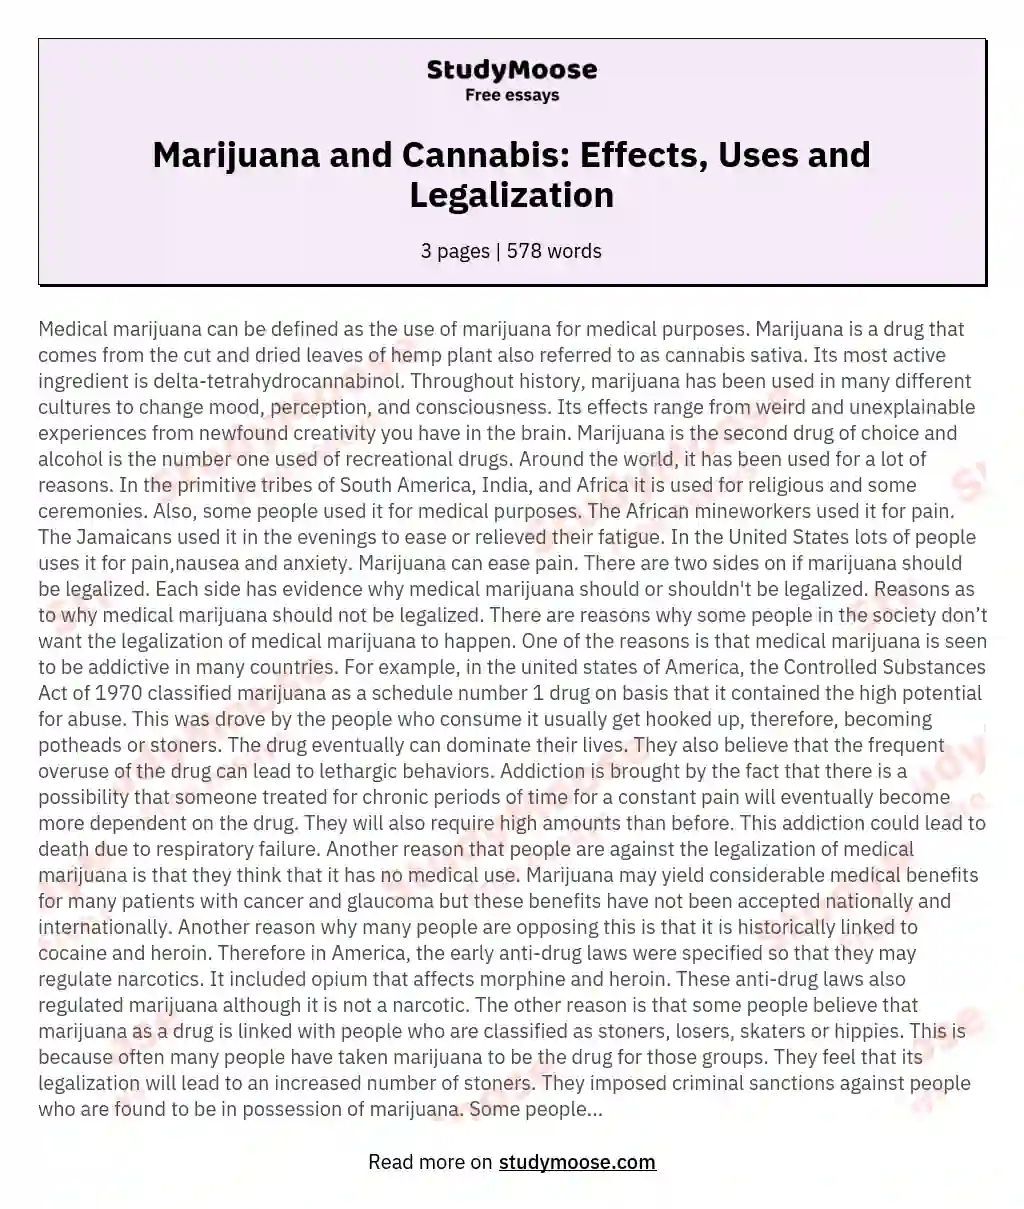 Marijuana and Cannabis: Effects, Uses and Legalization essay